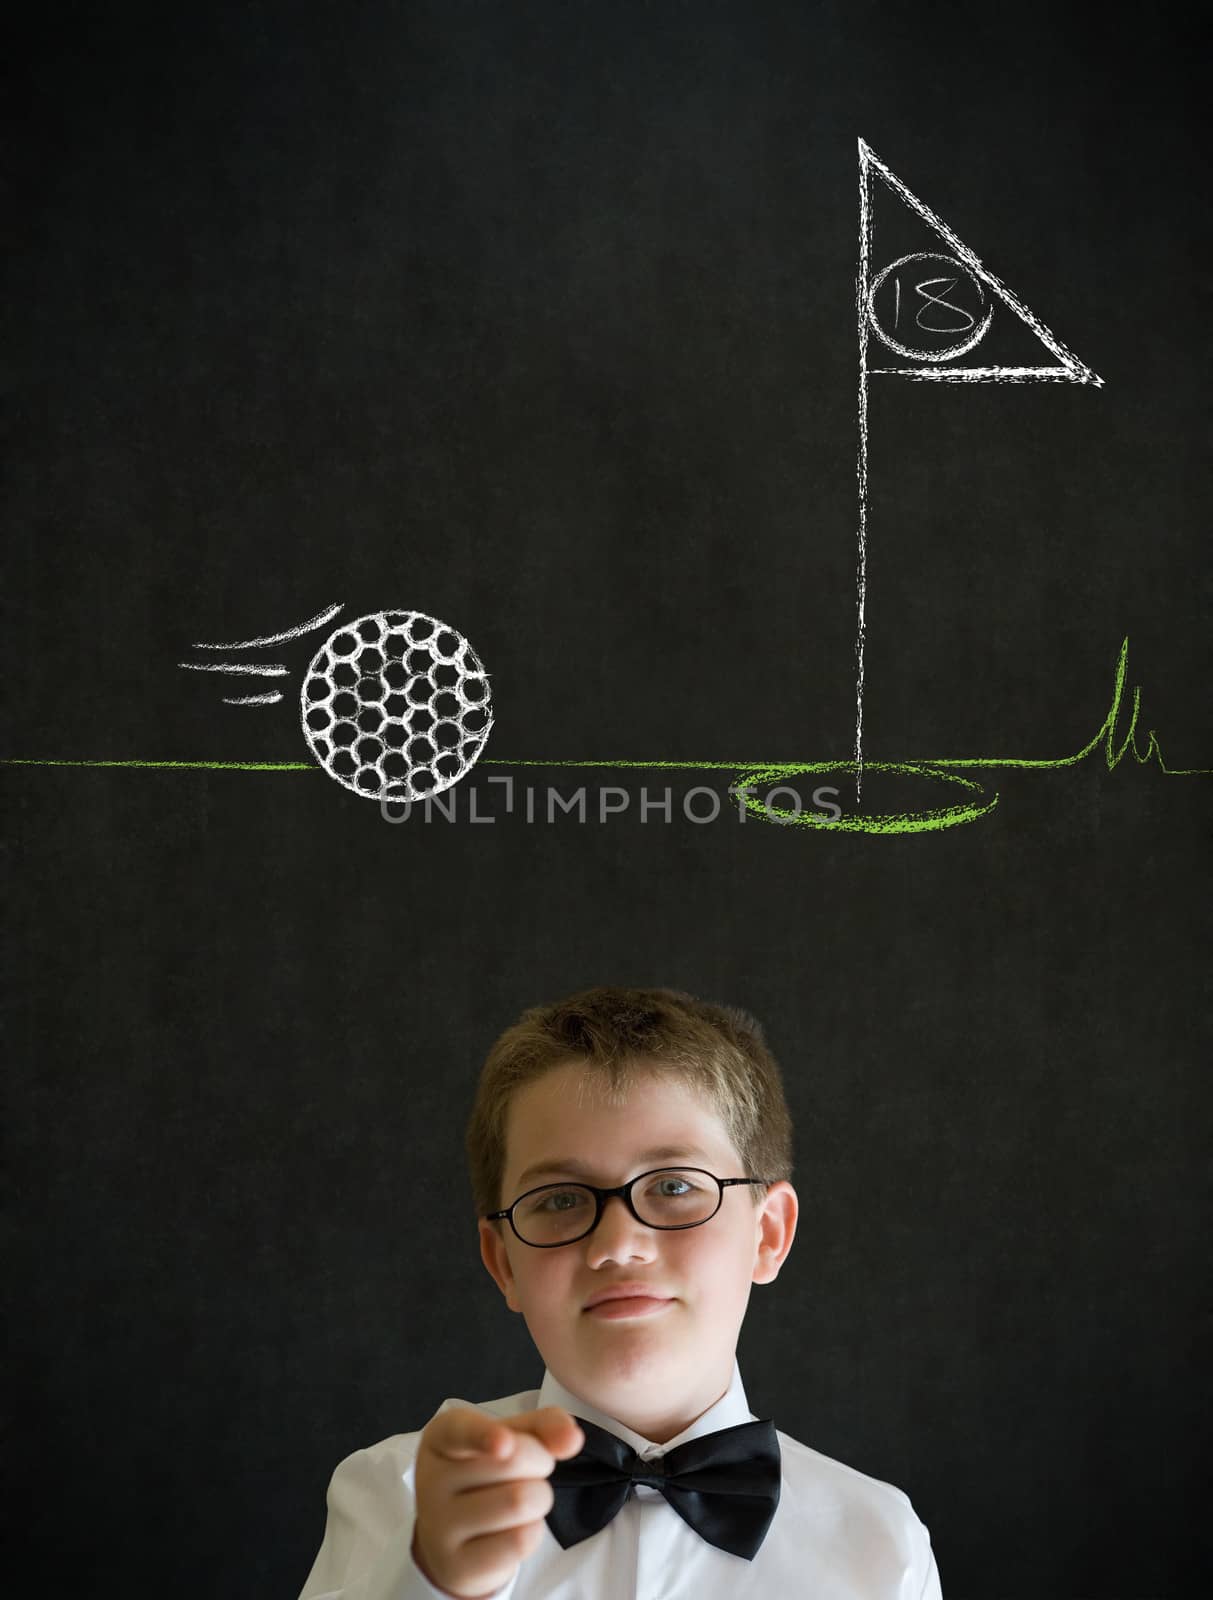 Education needs you thinking boy dressed up as business man with chalk golf ball flag green on blackboard background